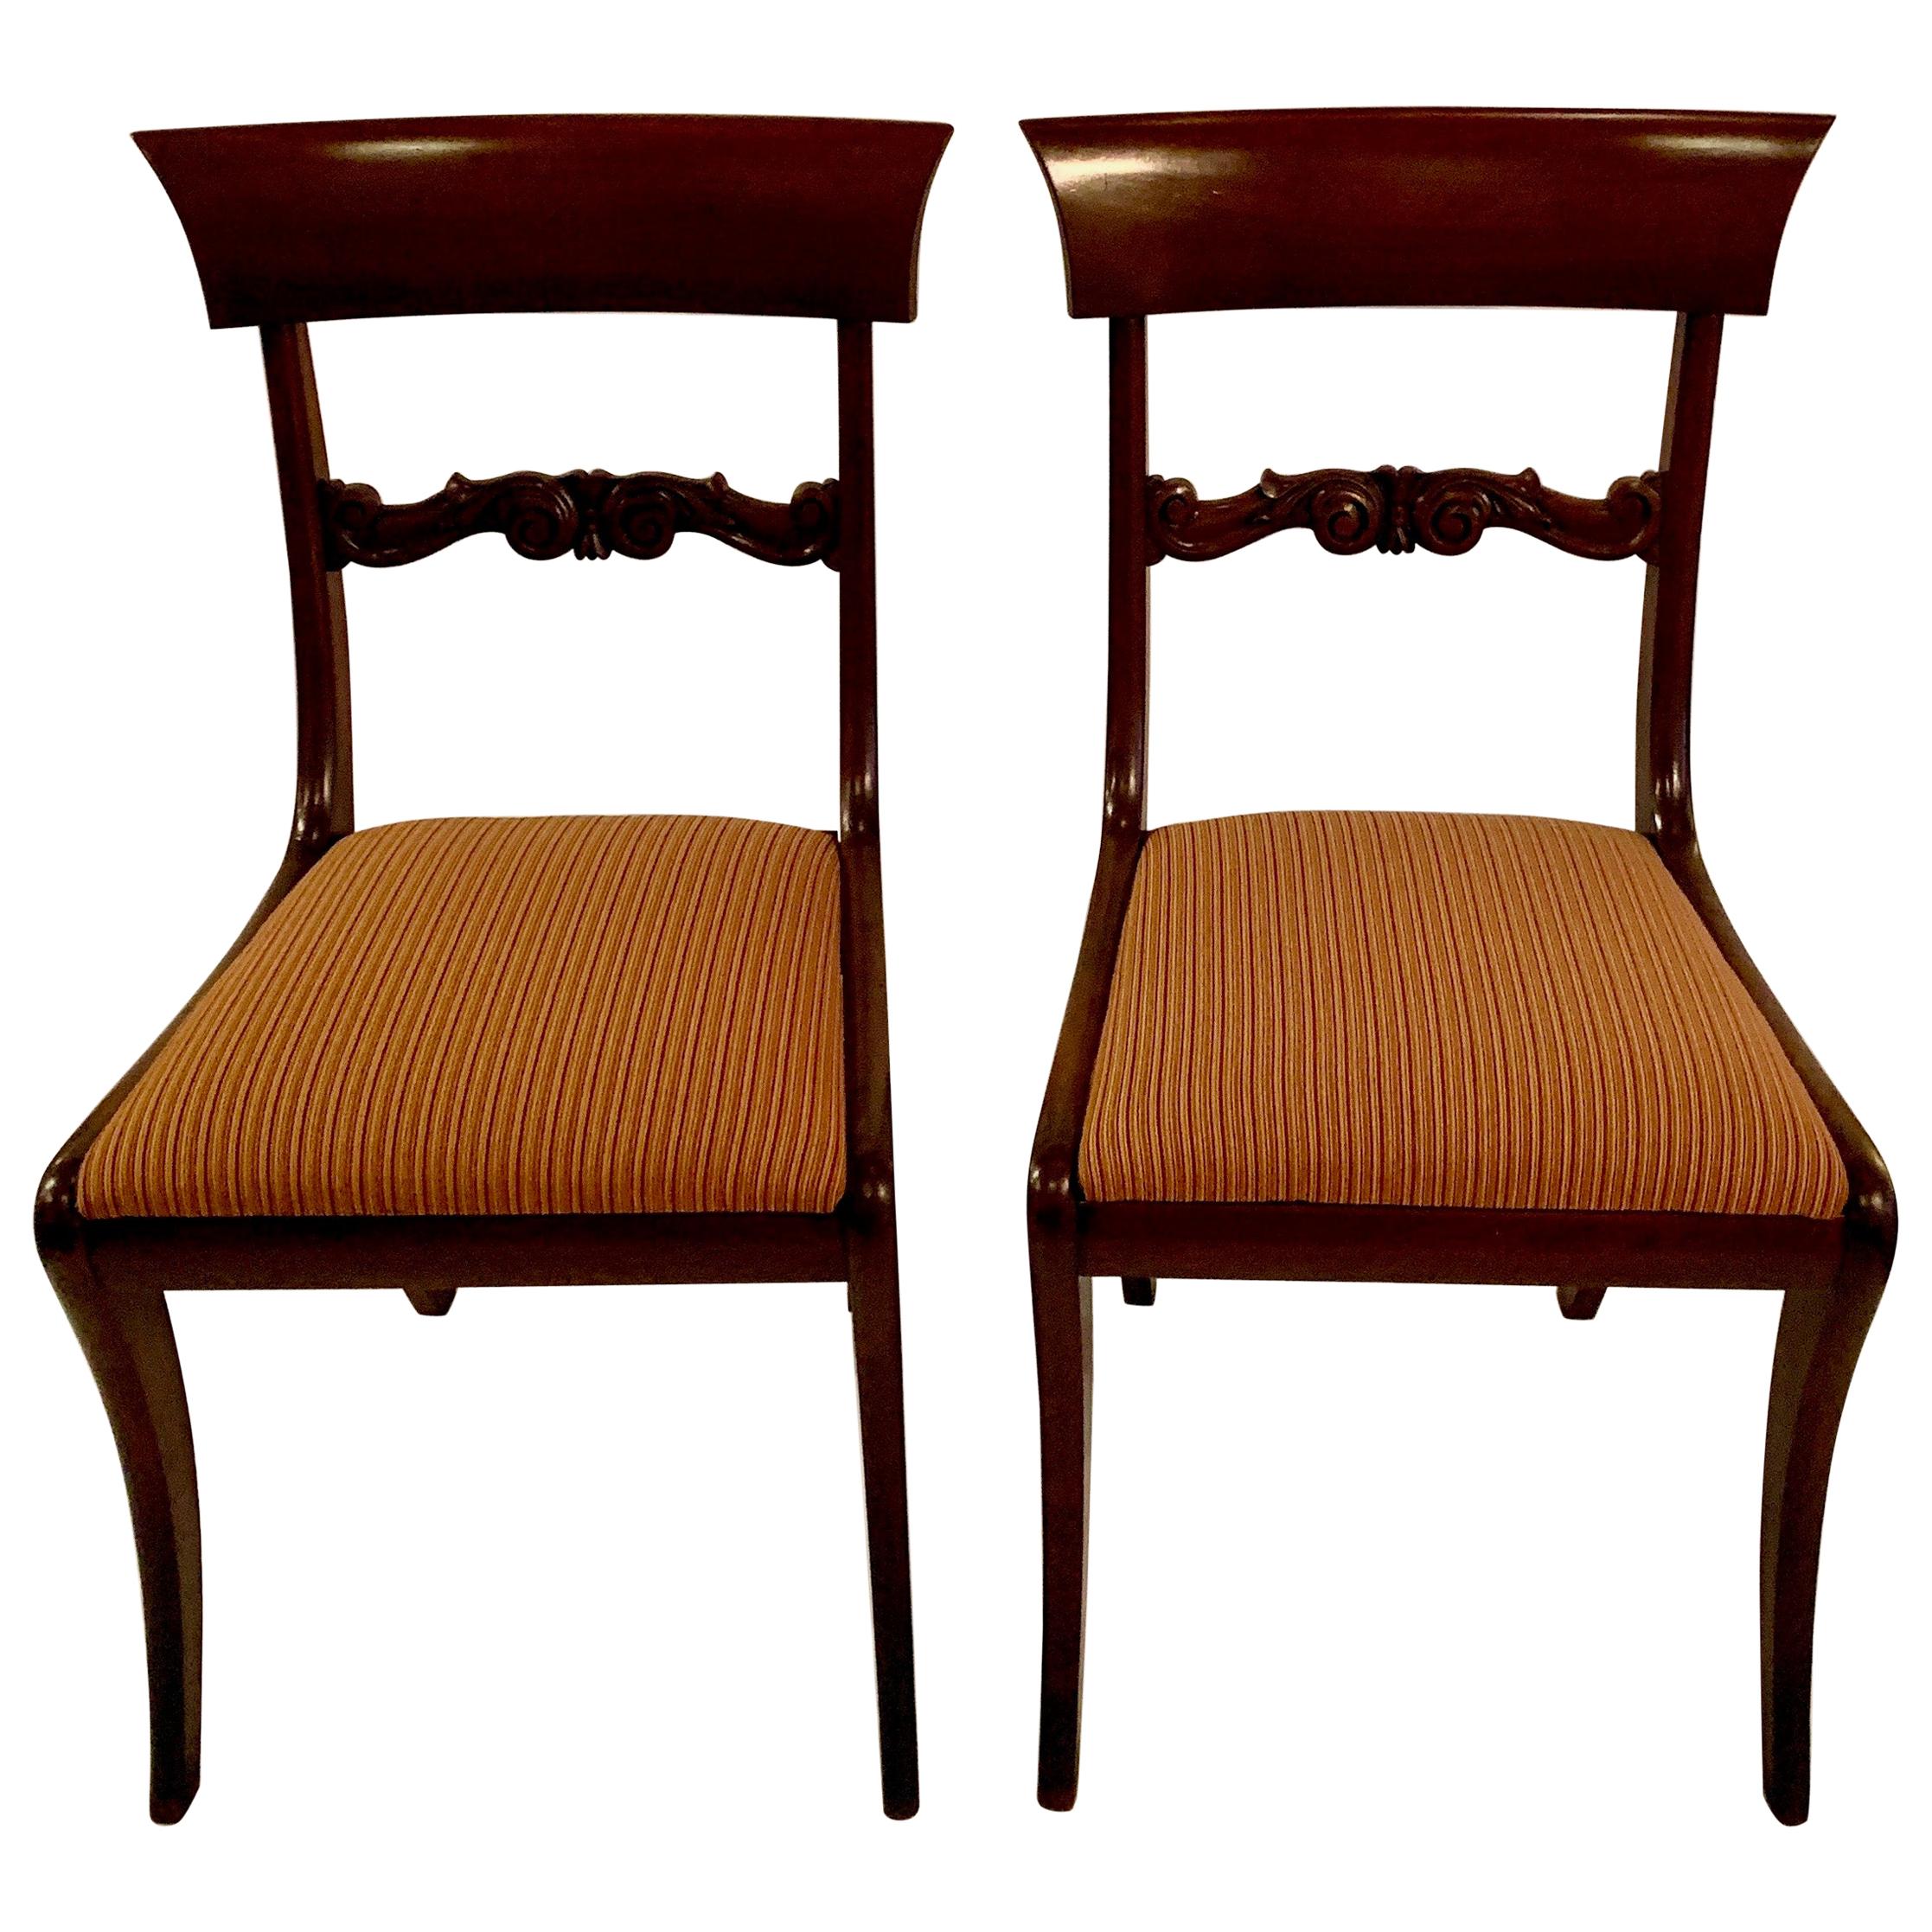 Pair of Antique Federal Style Chairs, circa 1890-1910 For Sale